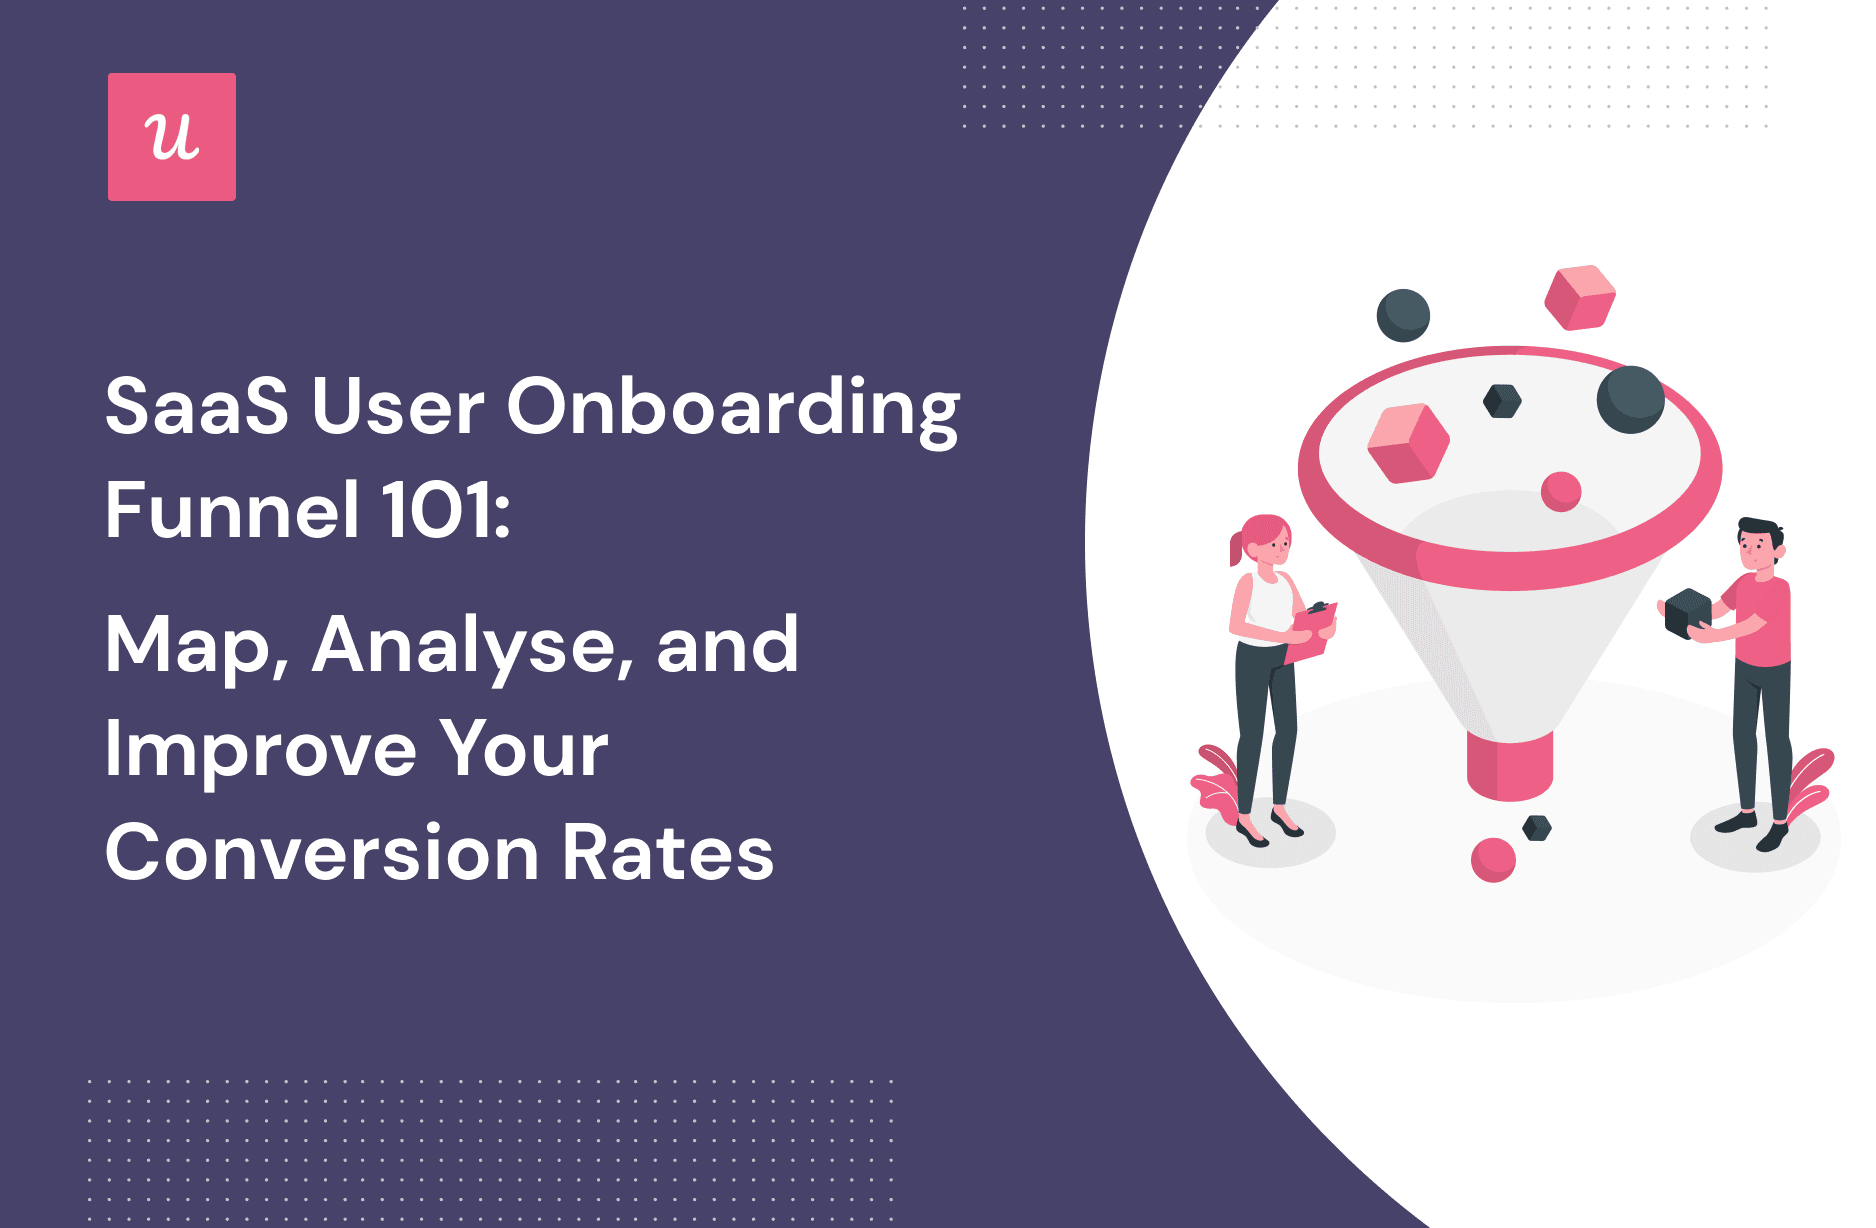 SaaS User Onboarding Funnel 101: Map, Analyse, and Improve Your Conversion Rates